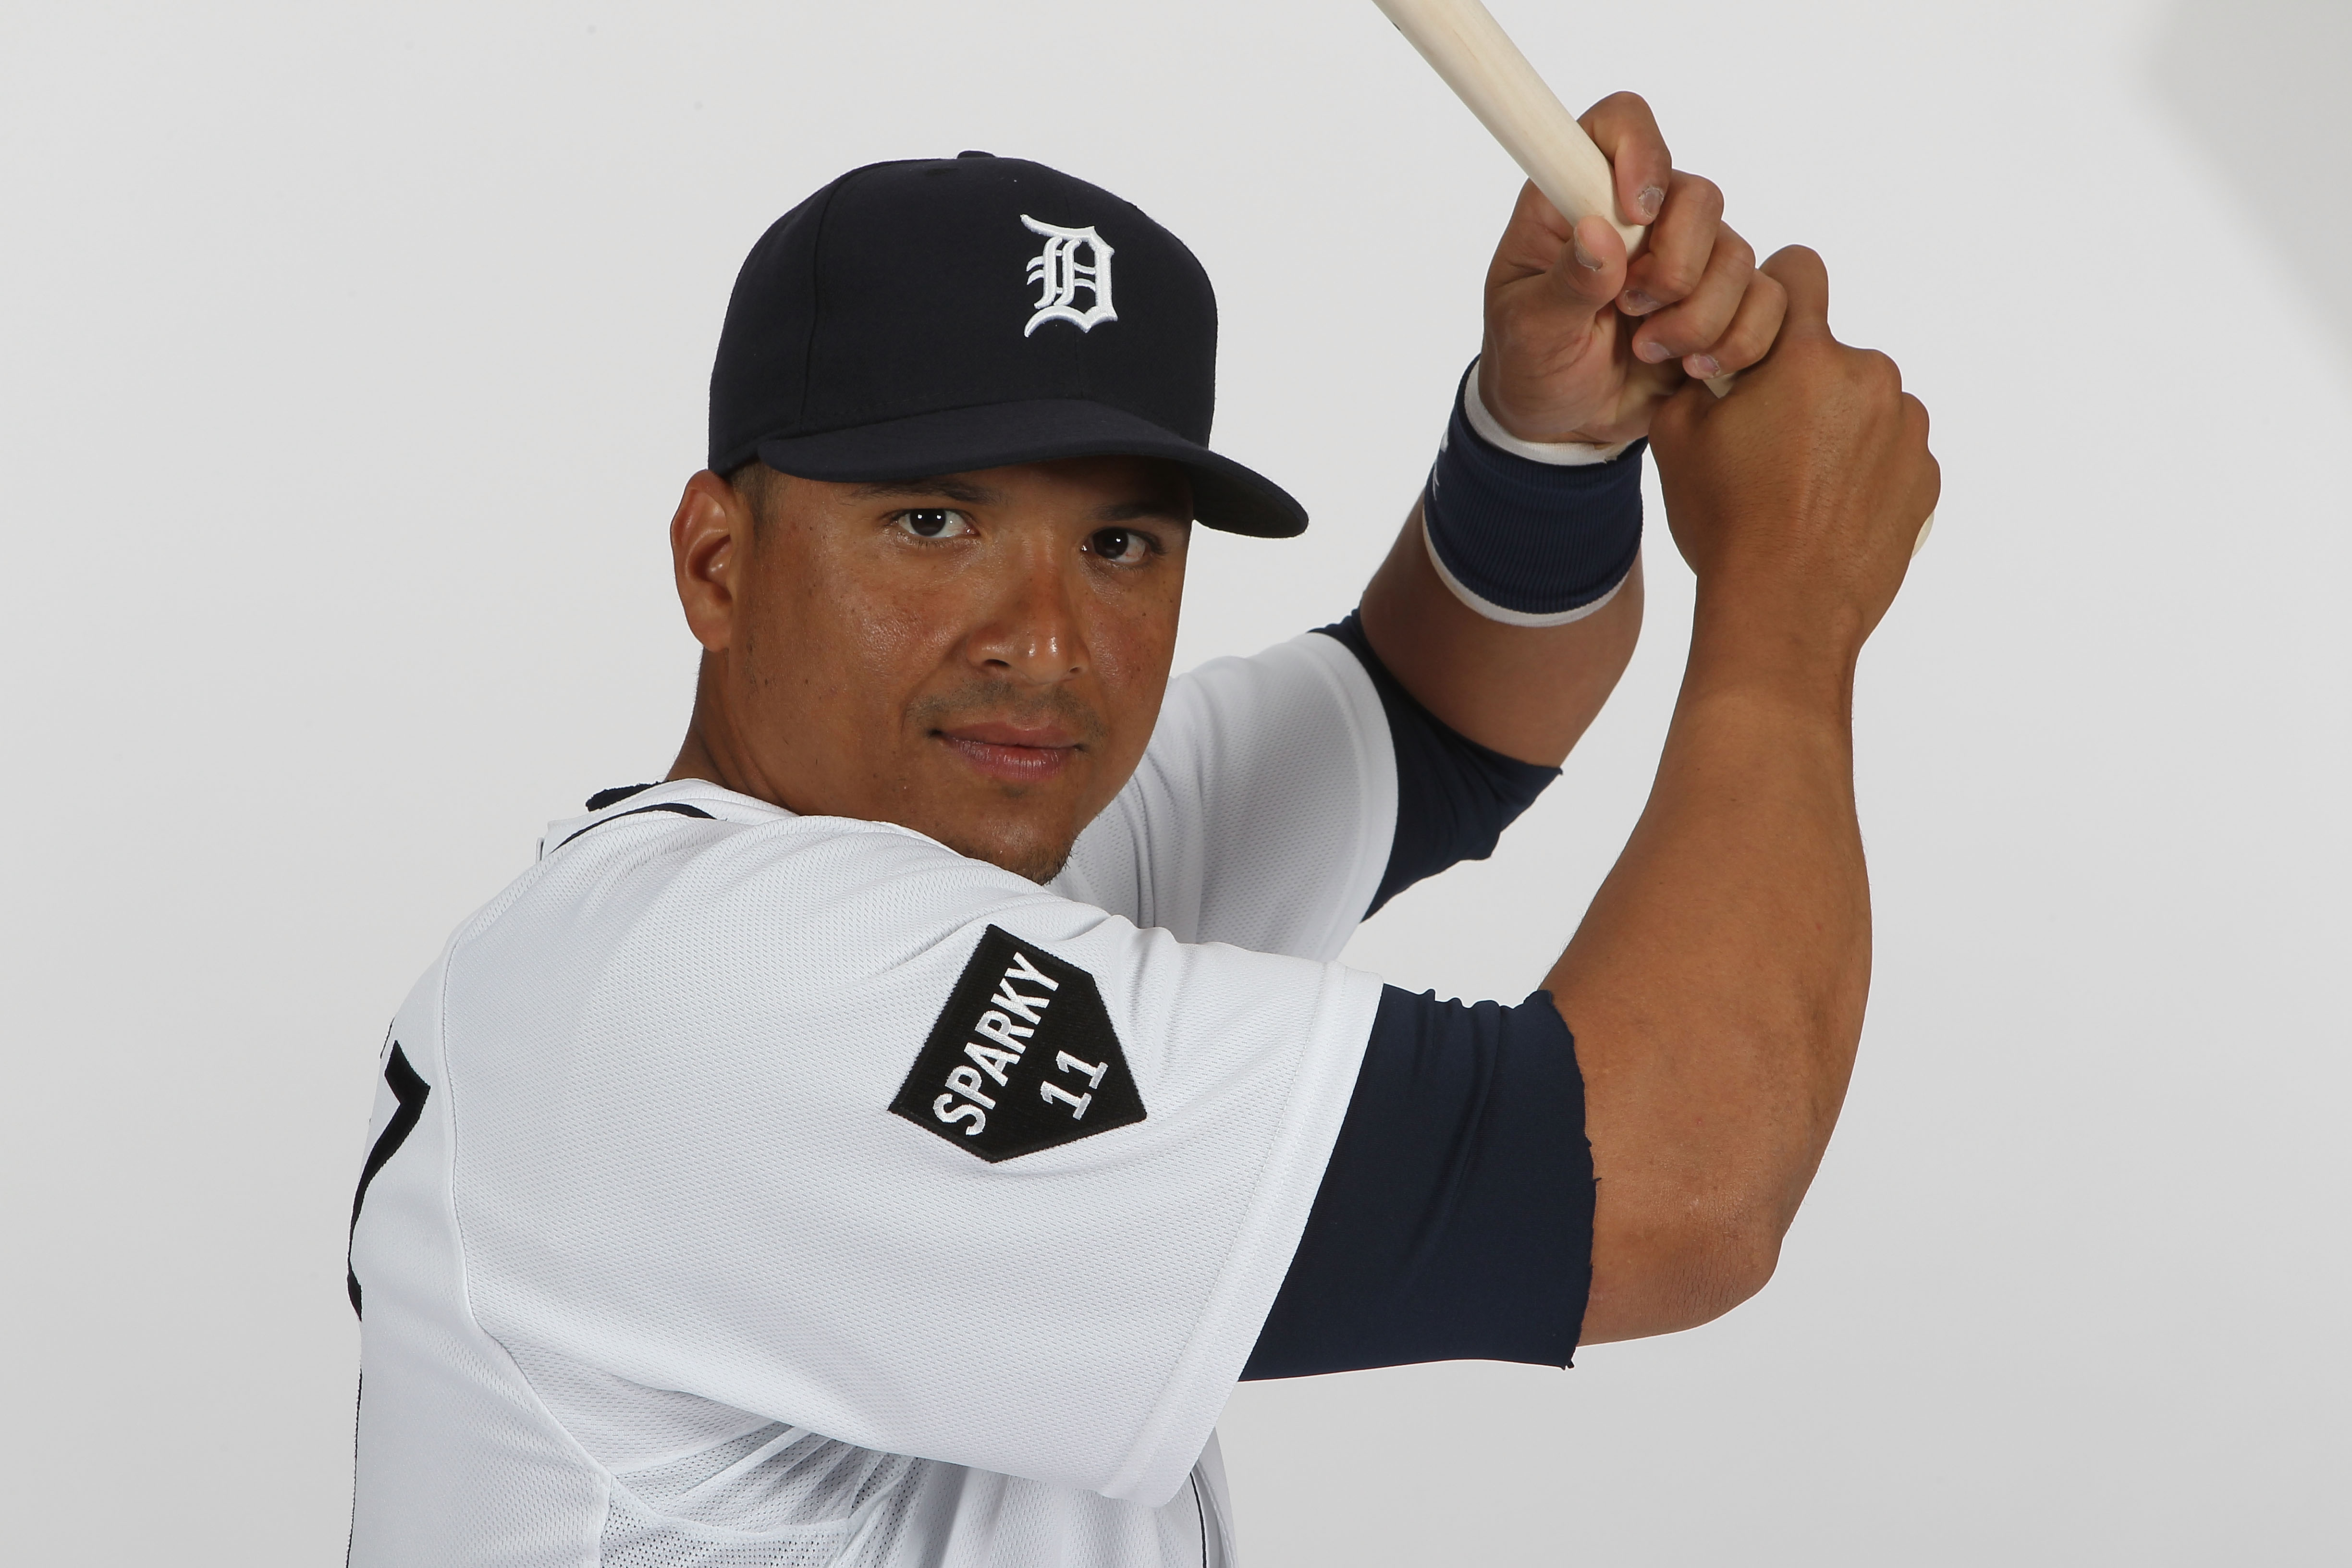 LAKELAND, FL - FEBRUARY 21:  Victor Martinez #41 of the Detroit Tigers poses for a portrait during Photo Day on February 21, 2011 at Joker Marchant Stadium in Lakeland, Florida.  (Photo by Nick Laham/Getty Images)